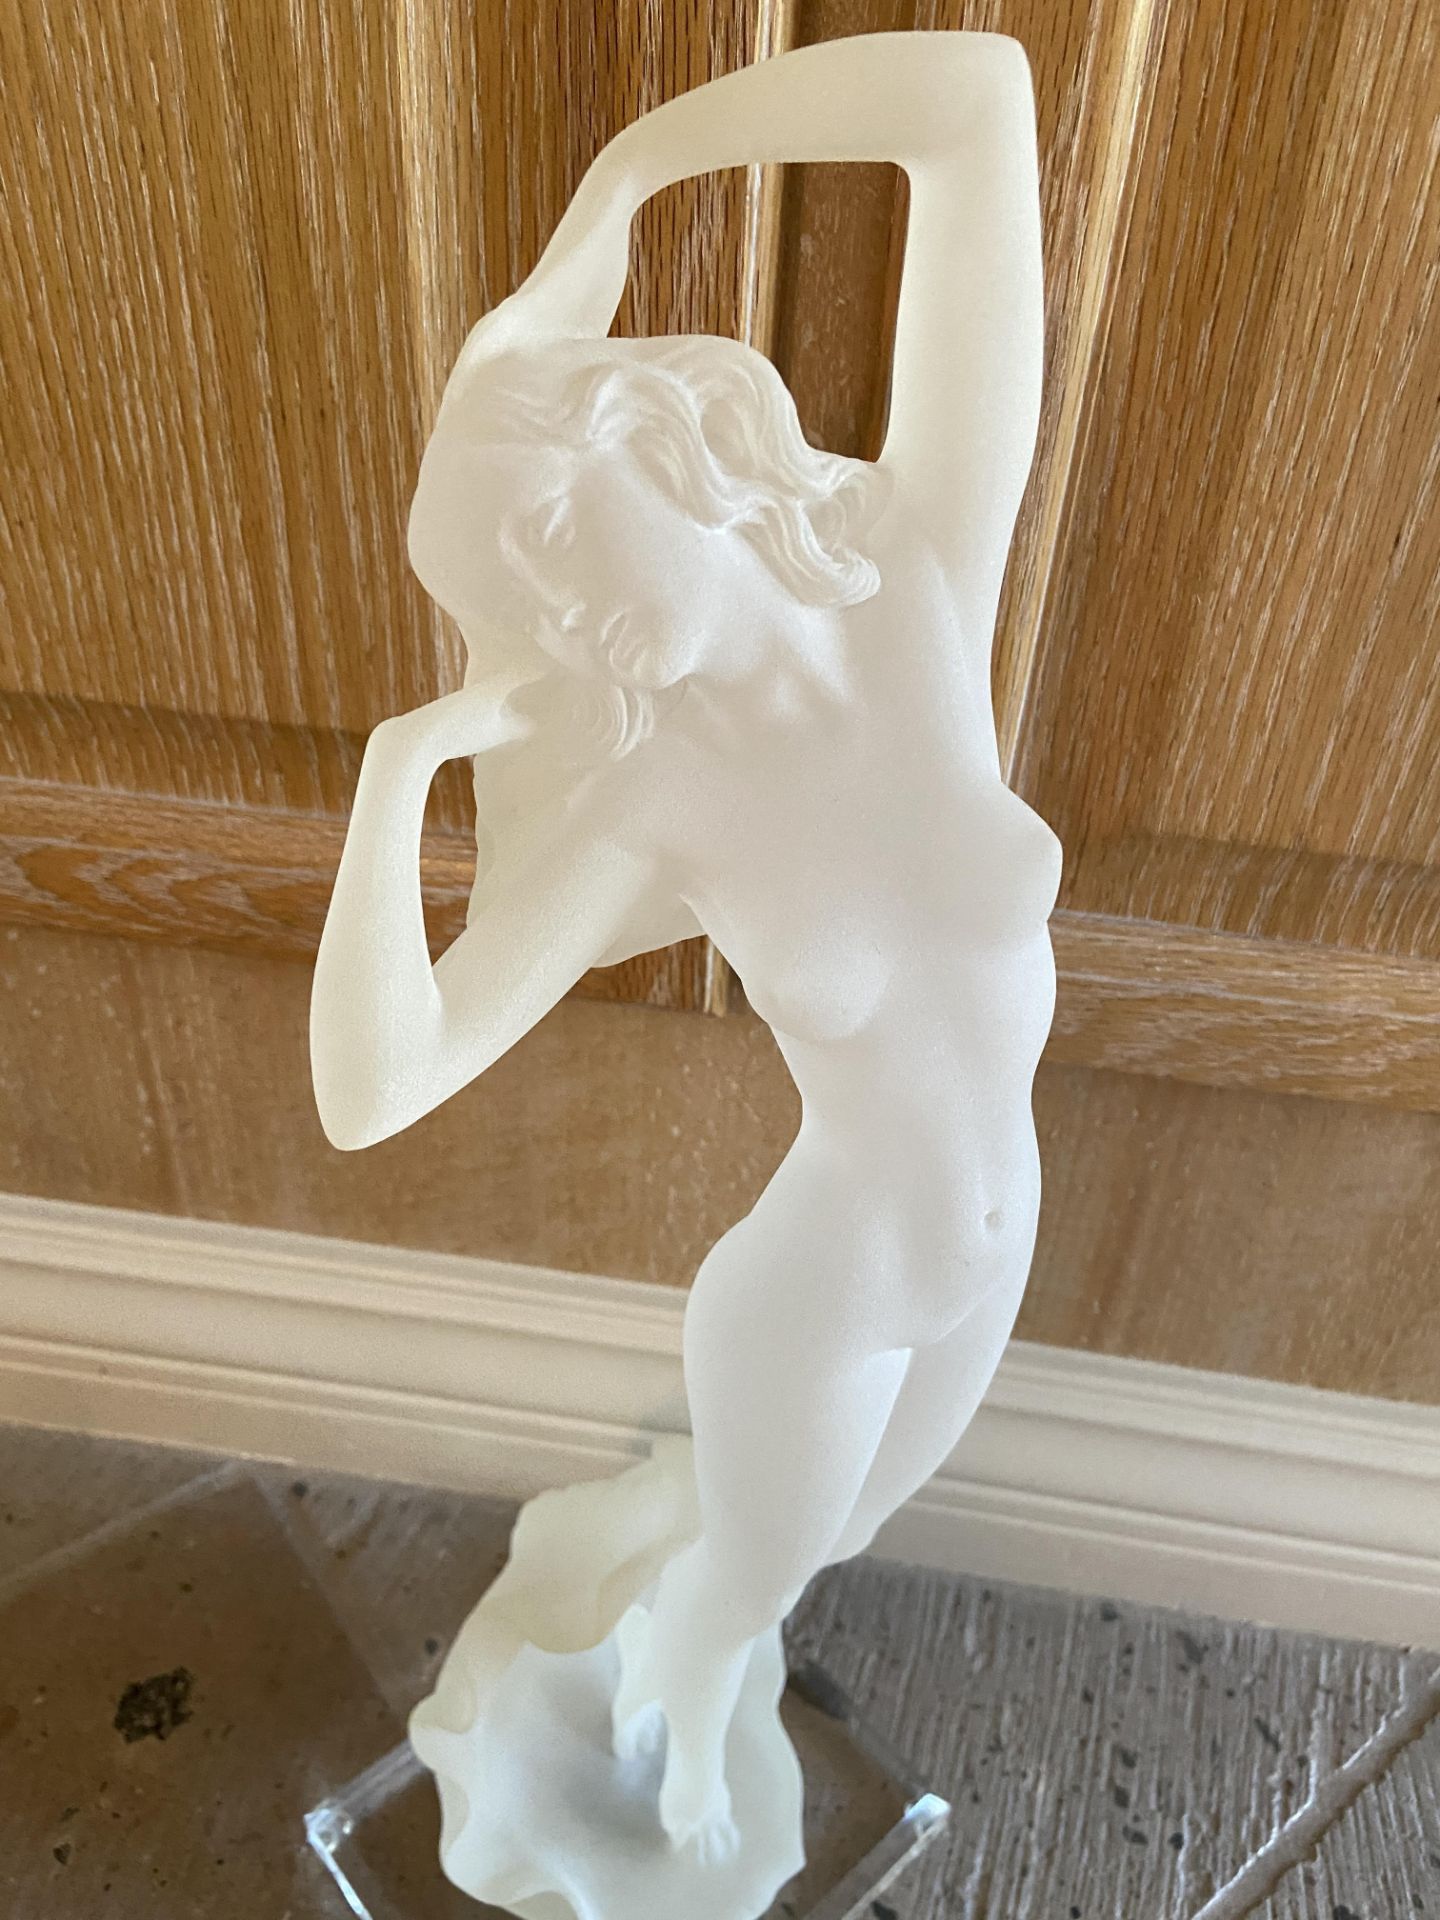 Crystallus 1987 Sculpture 18" Woman - Image 2 of 8